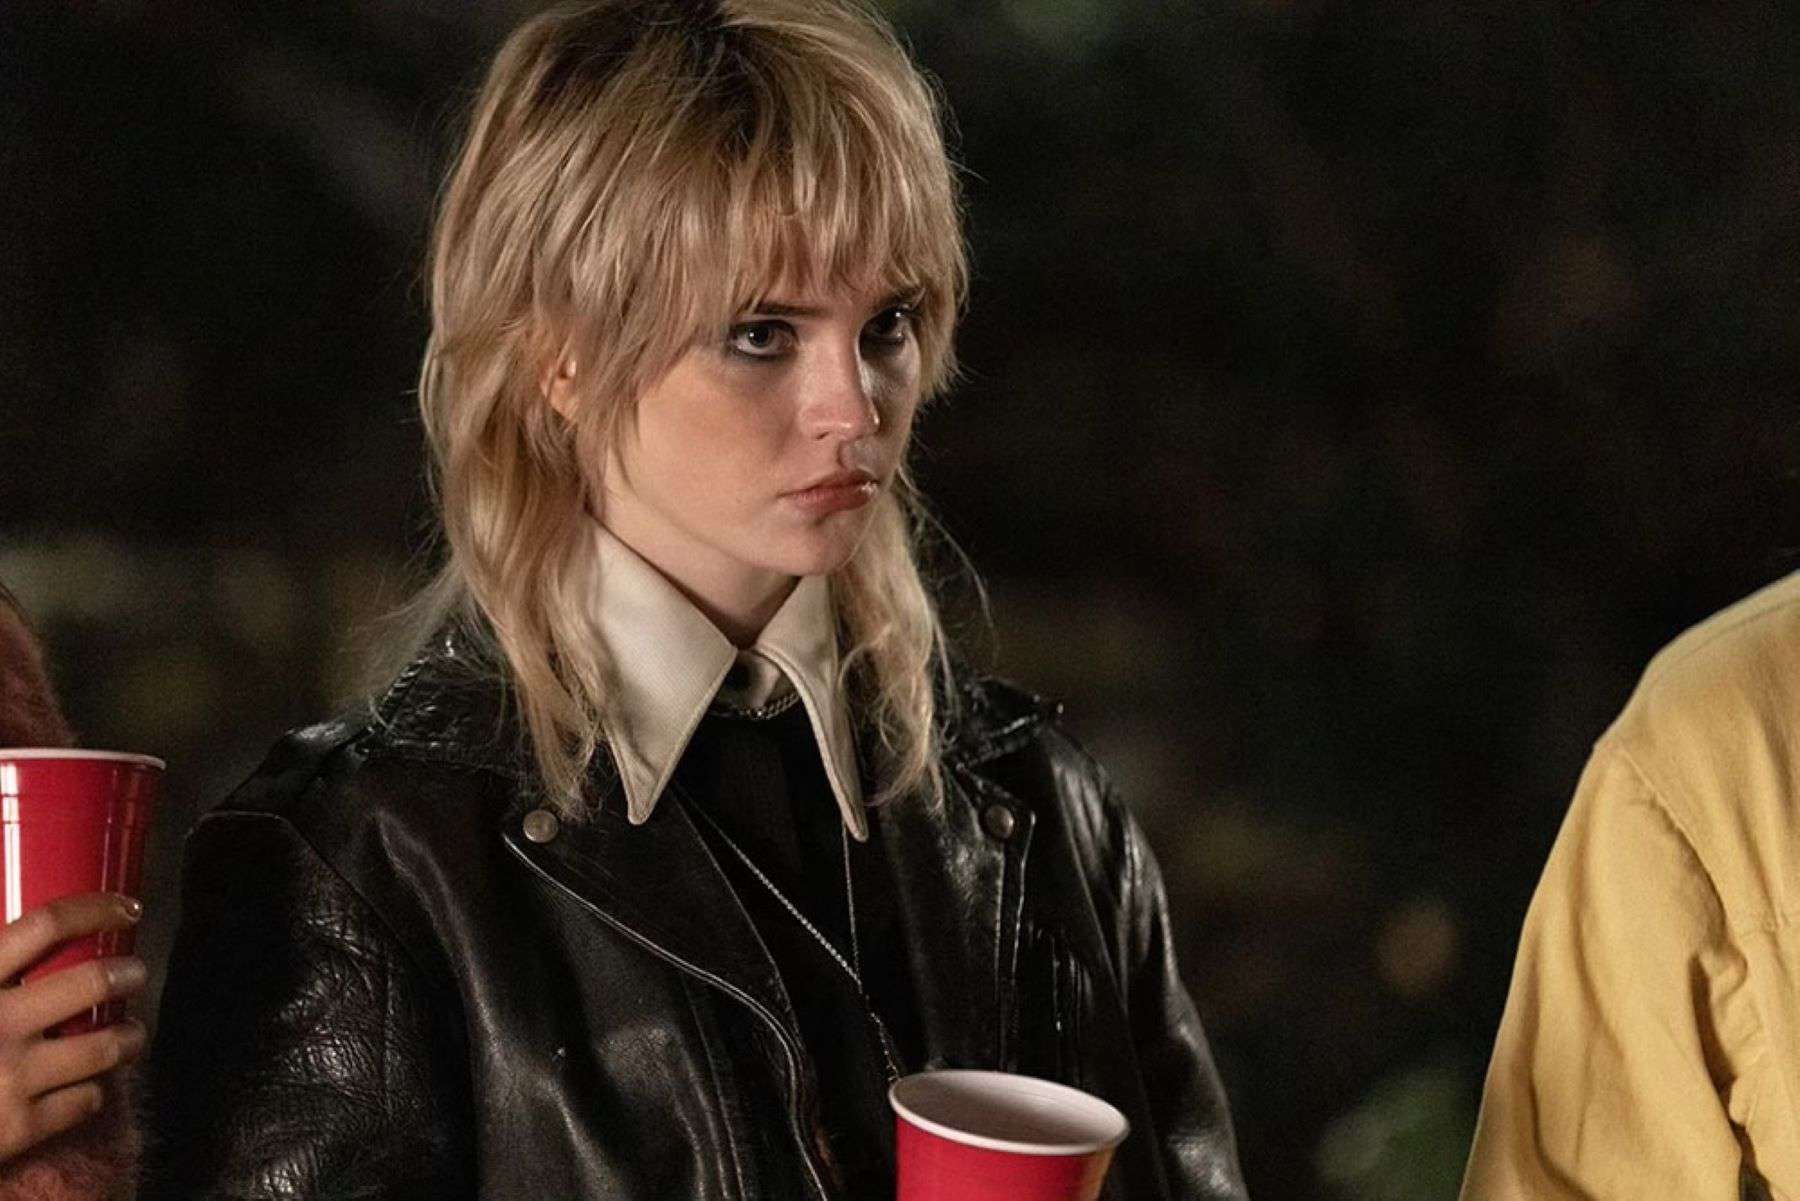 A teenage girl holds a red cup in this photo by Showtime.